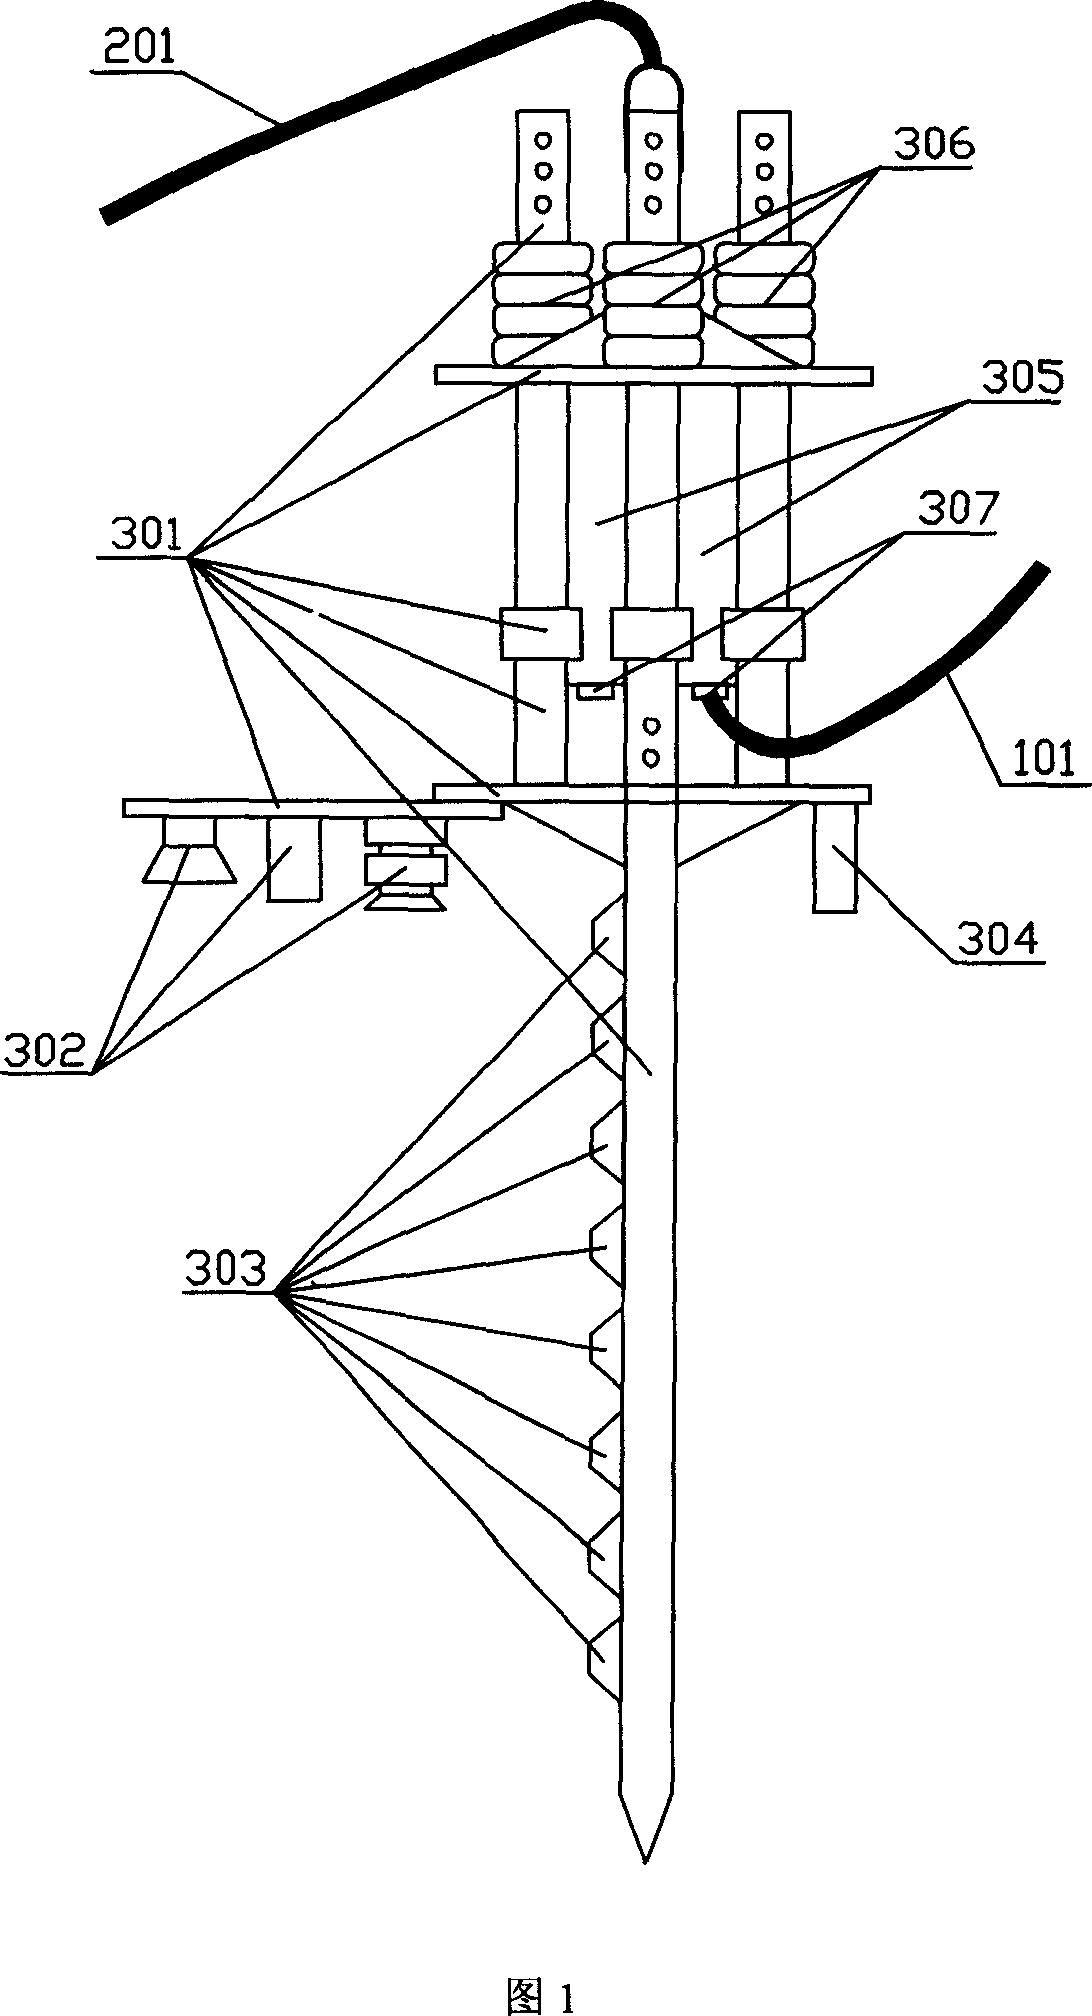 Multifrequency submarine acoustic in-situ testing system and method